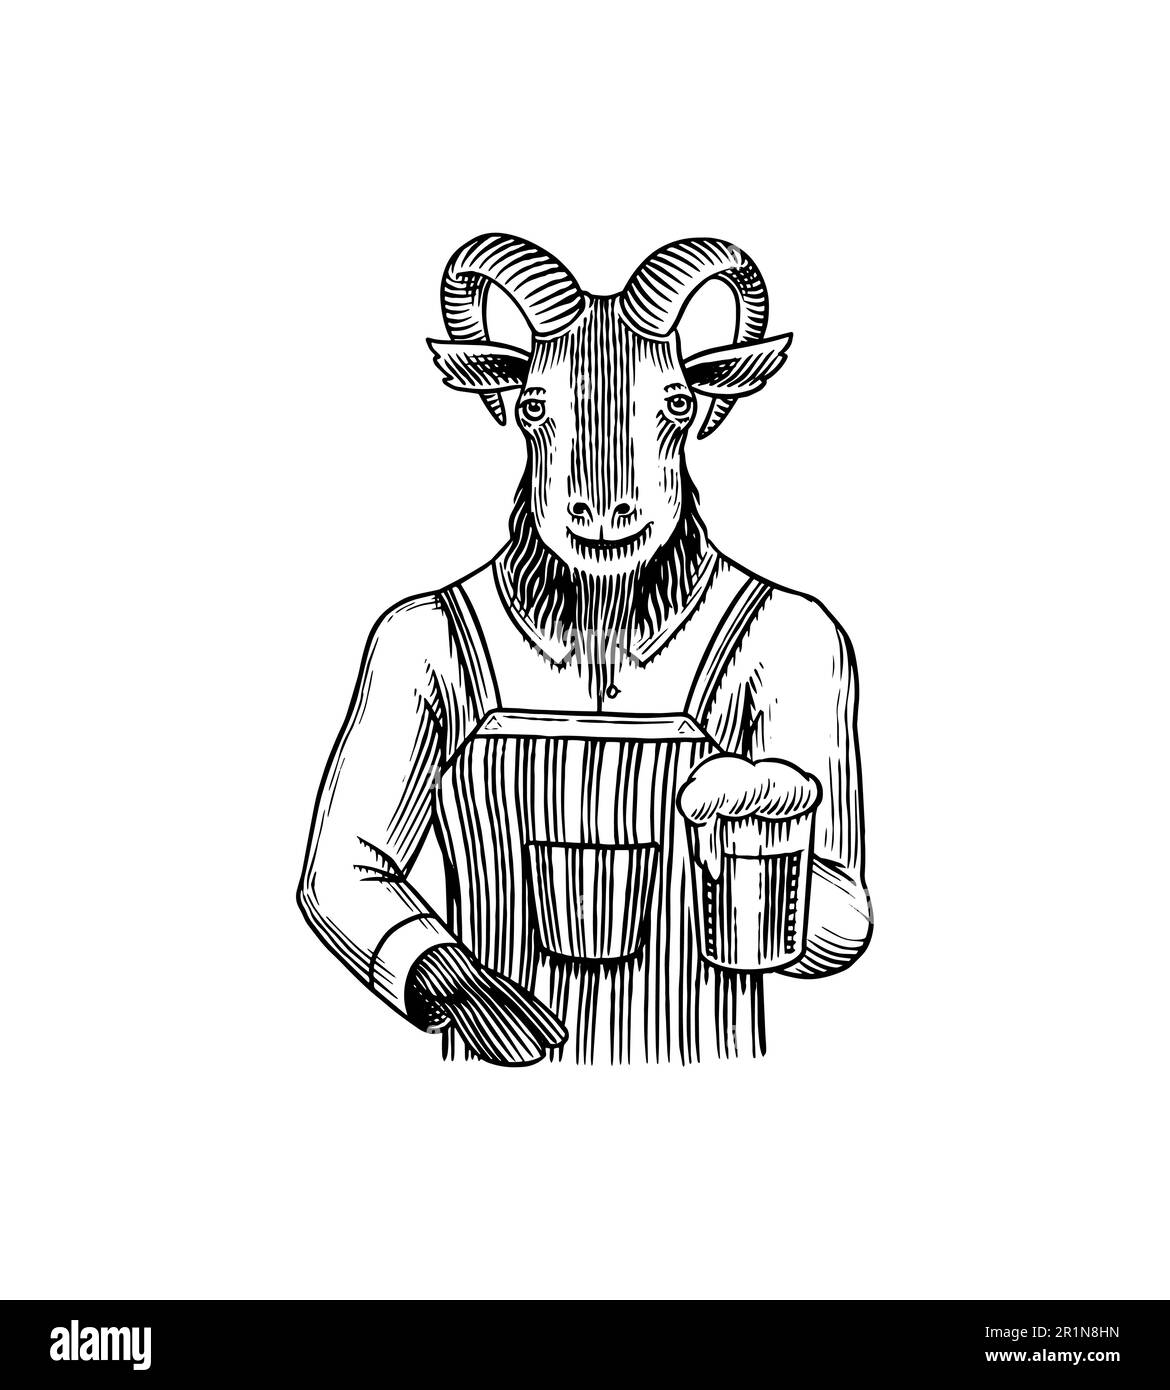 Goat bartender character in a suit with beer. Fashion Animal in Retro Clothing in an apron. Vintage engraving style. Hand drawn sketch for typography Stock Vector